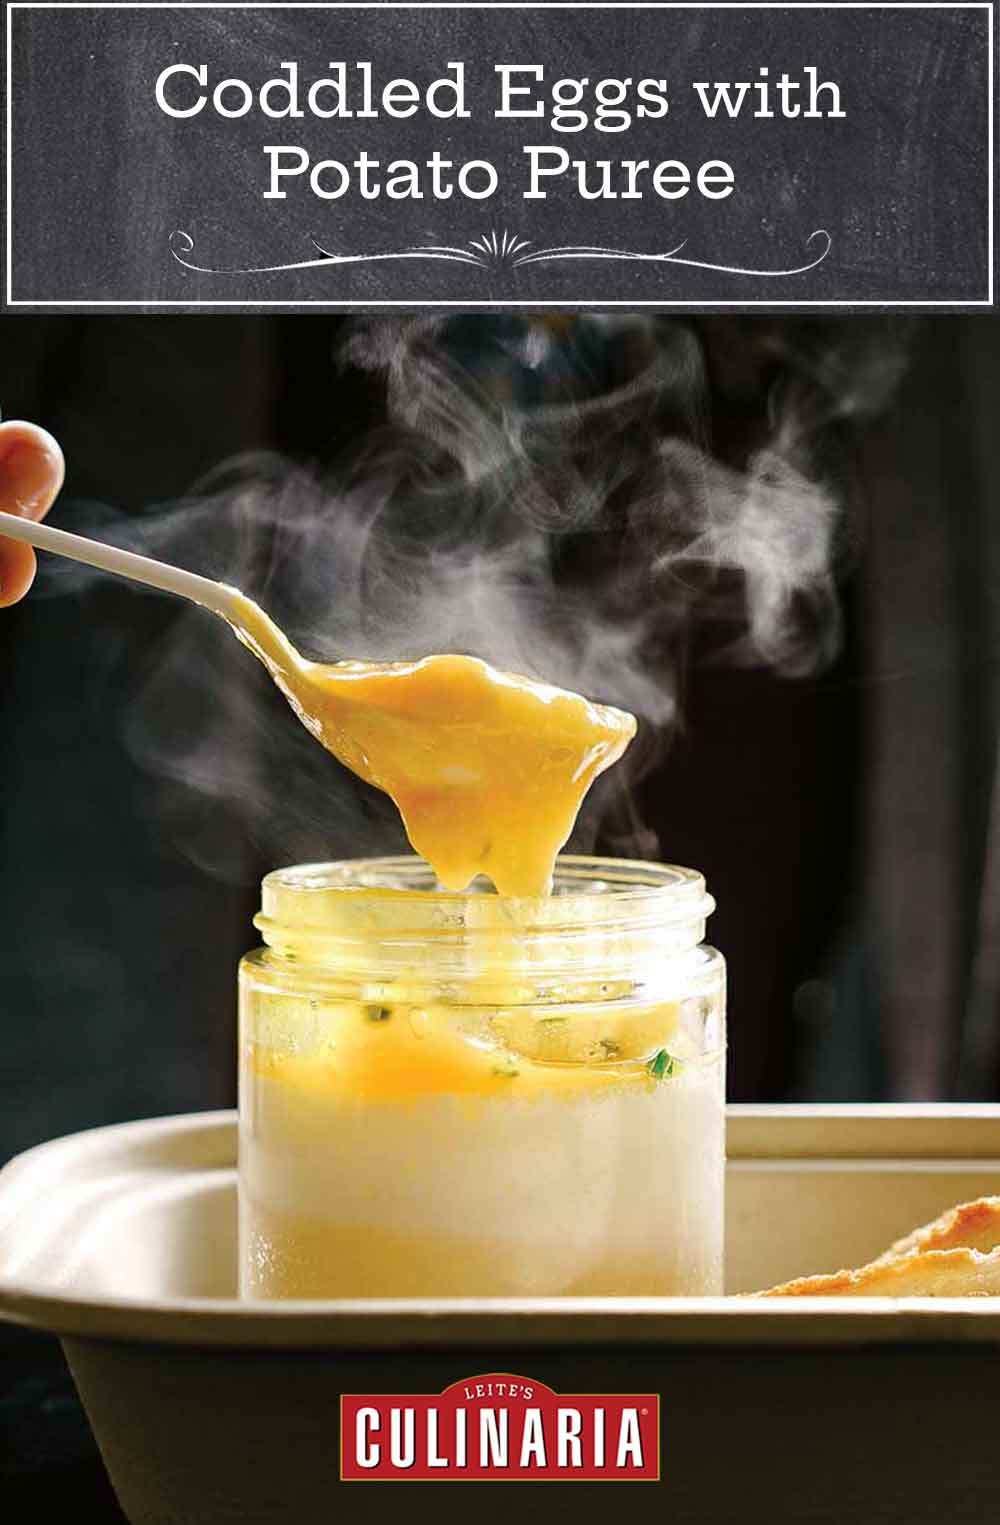 Person with a spoon digging into a glass jar of coddle eggs with potato puree underneath, slice of bread nearby